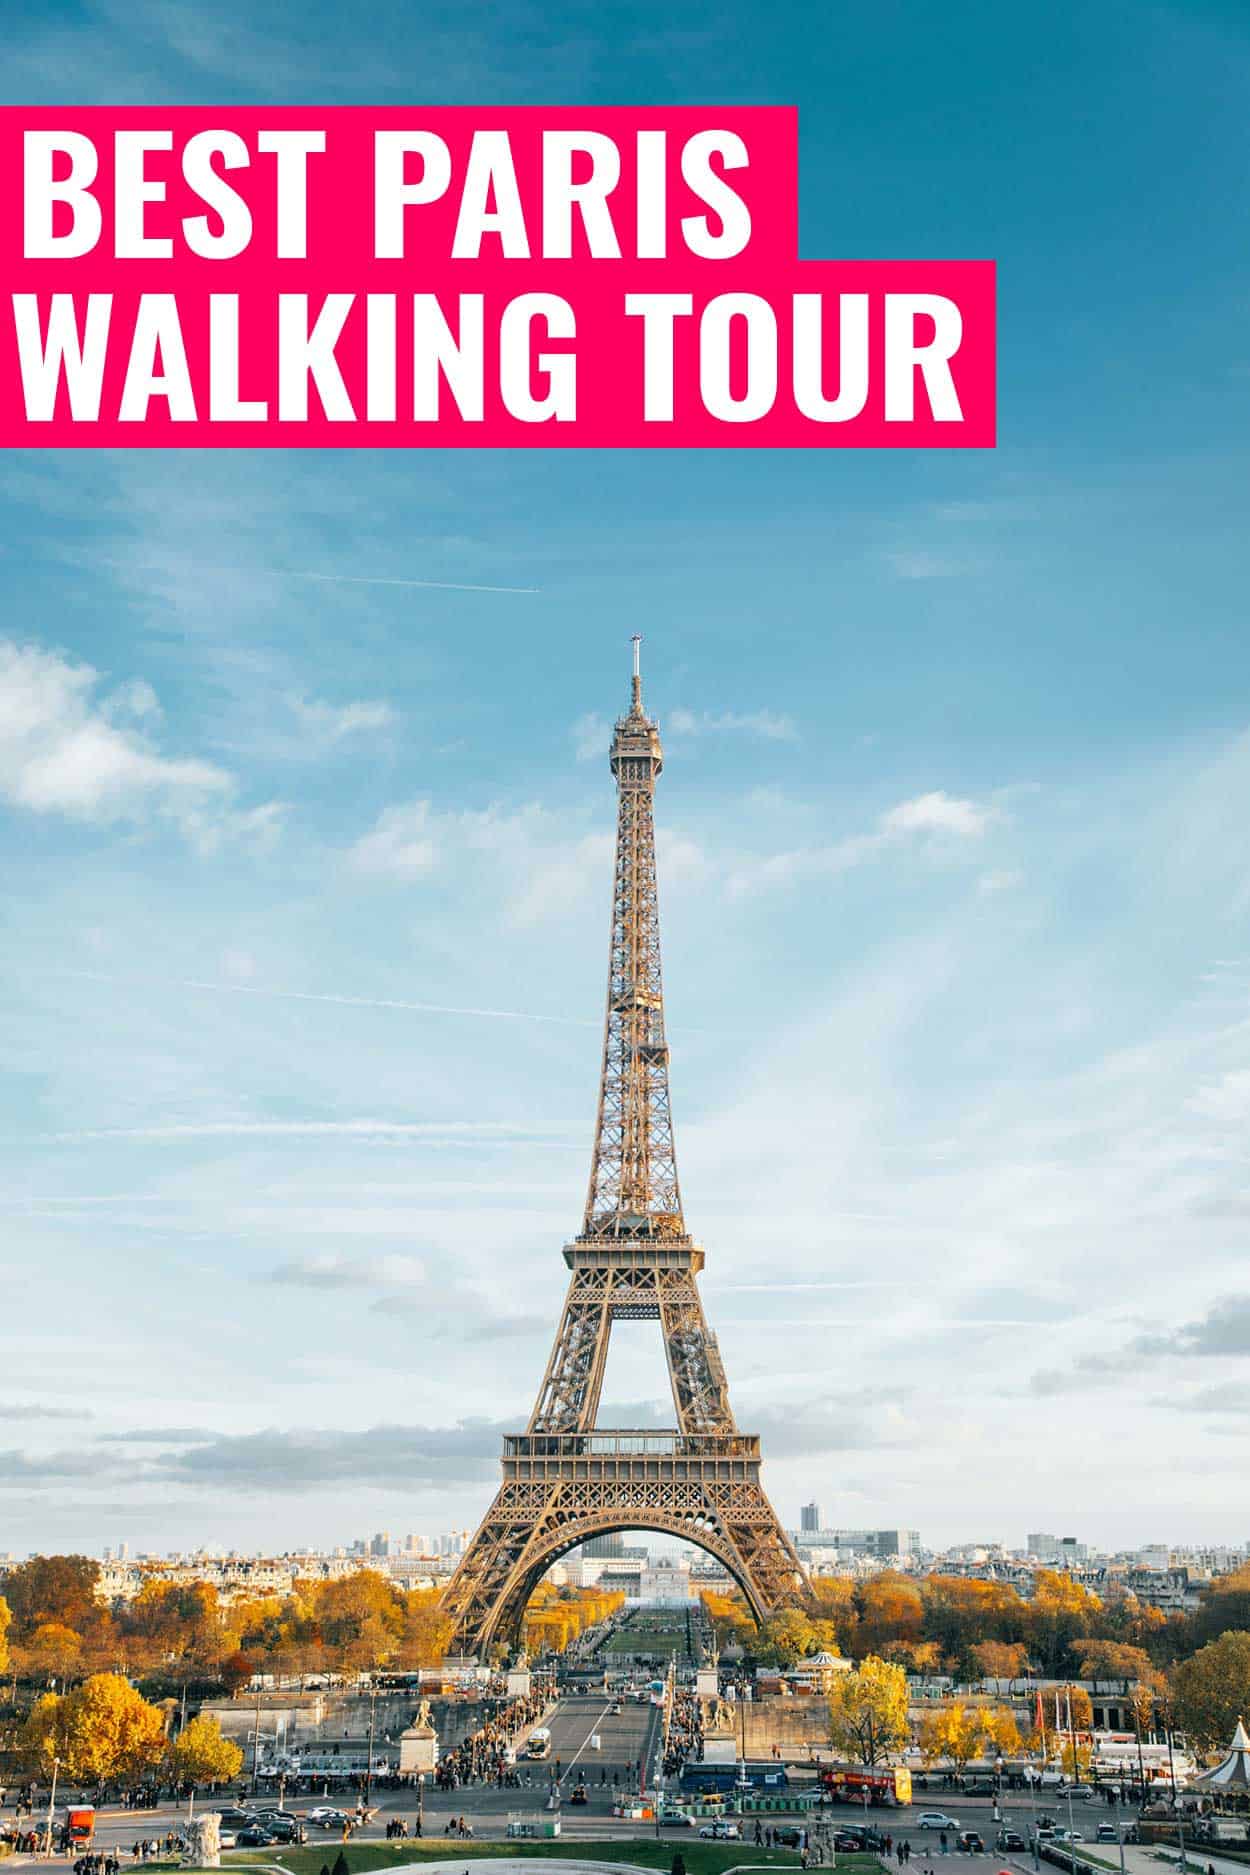 Streets of Paris with Eiffel tower in the background with text that says Paris Walking Tour